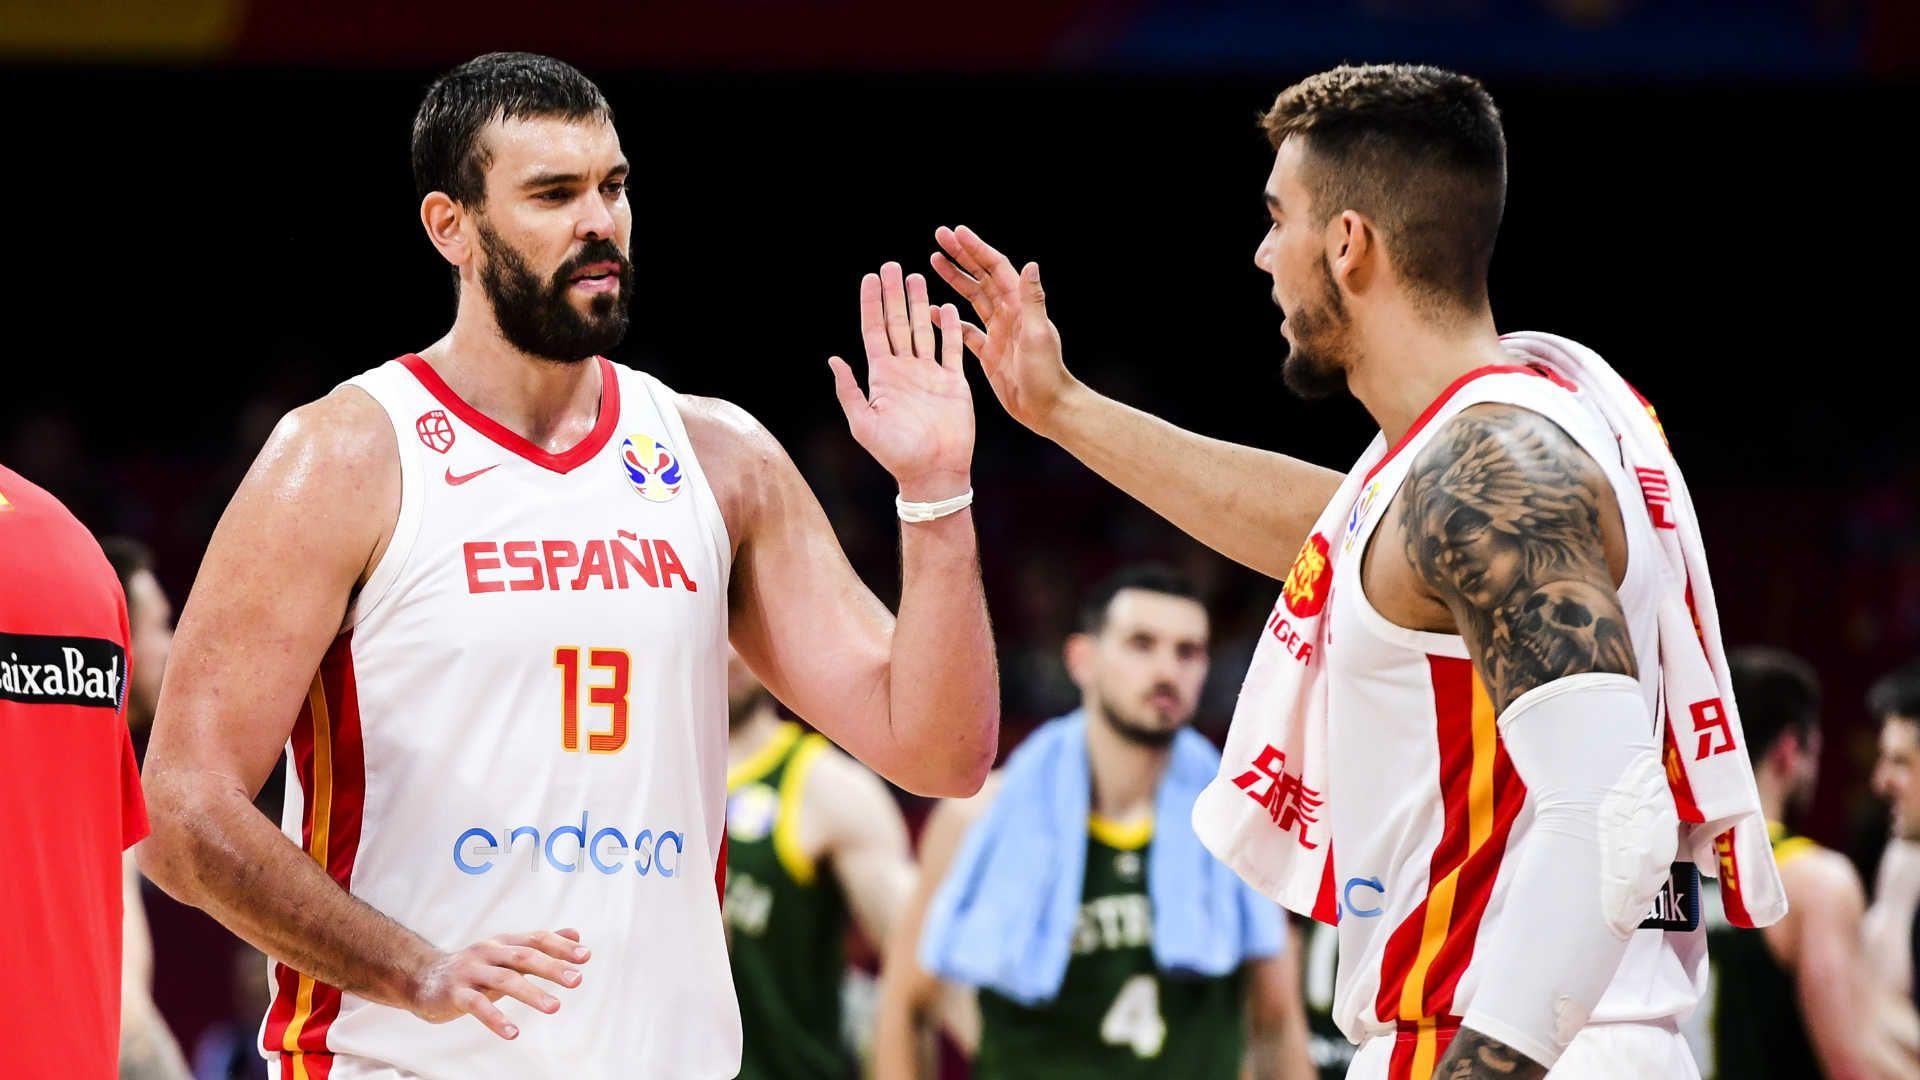 FIBA World Cup 2019: Spain & Argentina set to play for gold